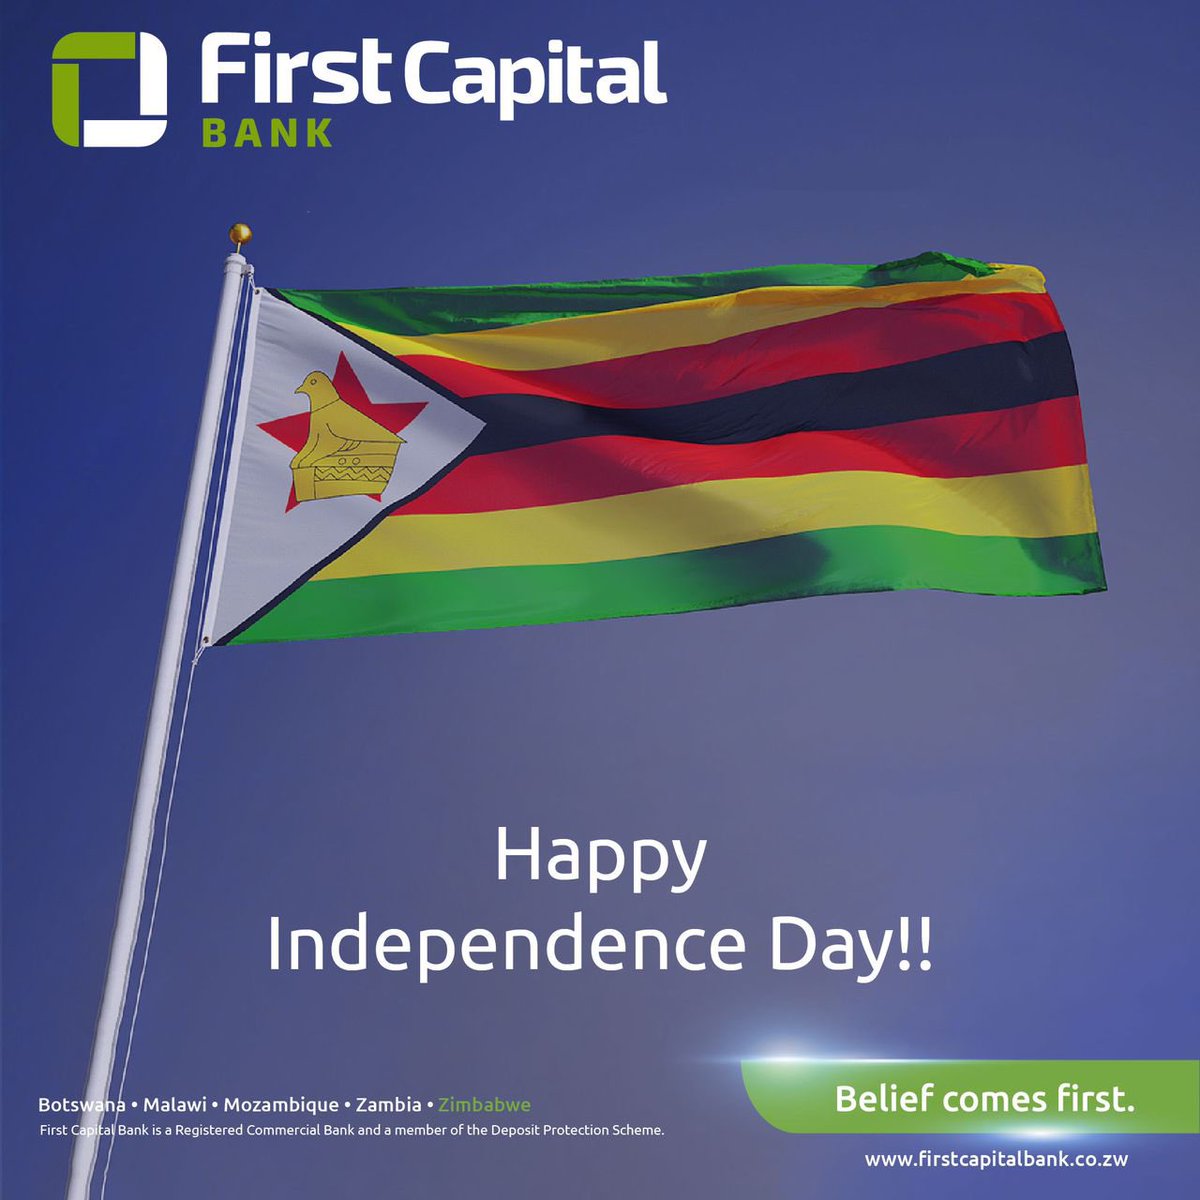 Here’s to believing in the future and the people that make it happen. Happy Independence Day #beliefcomesfirst